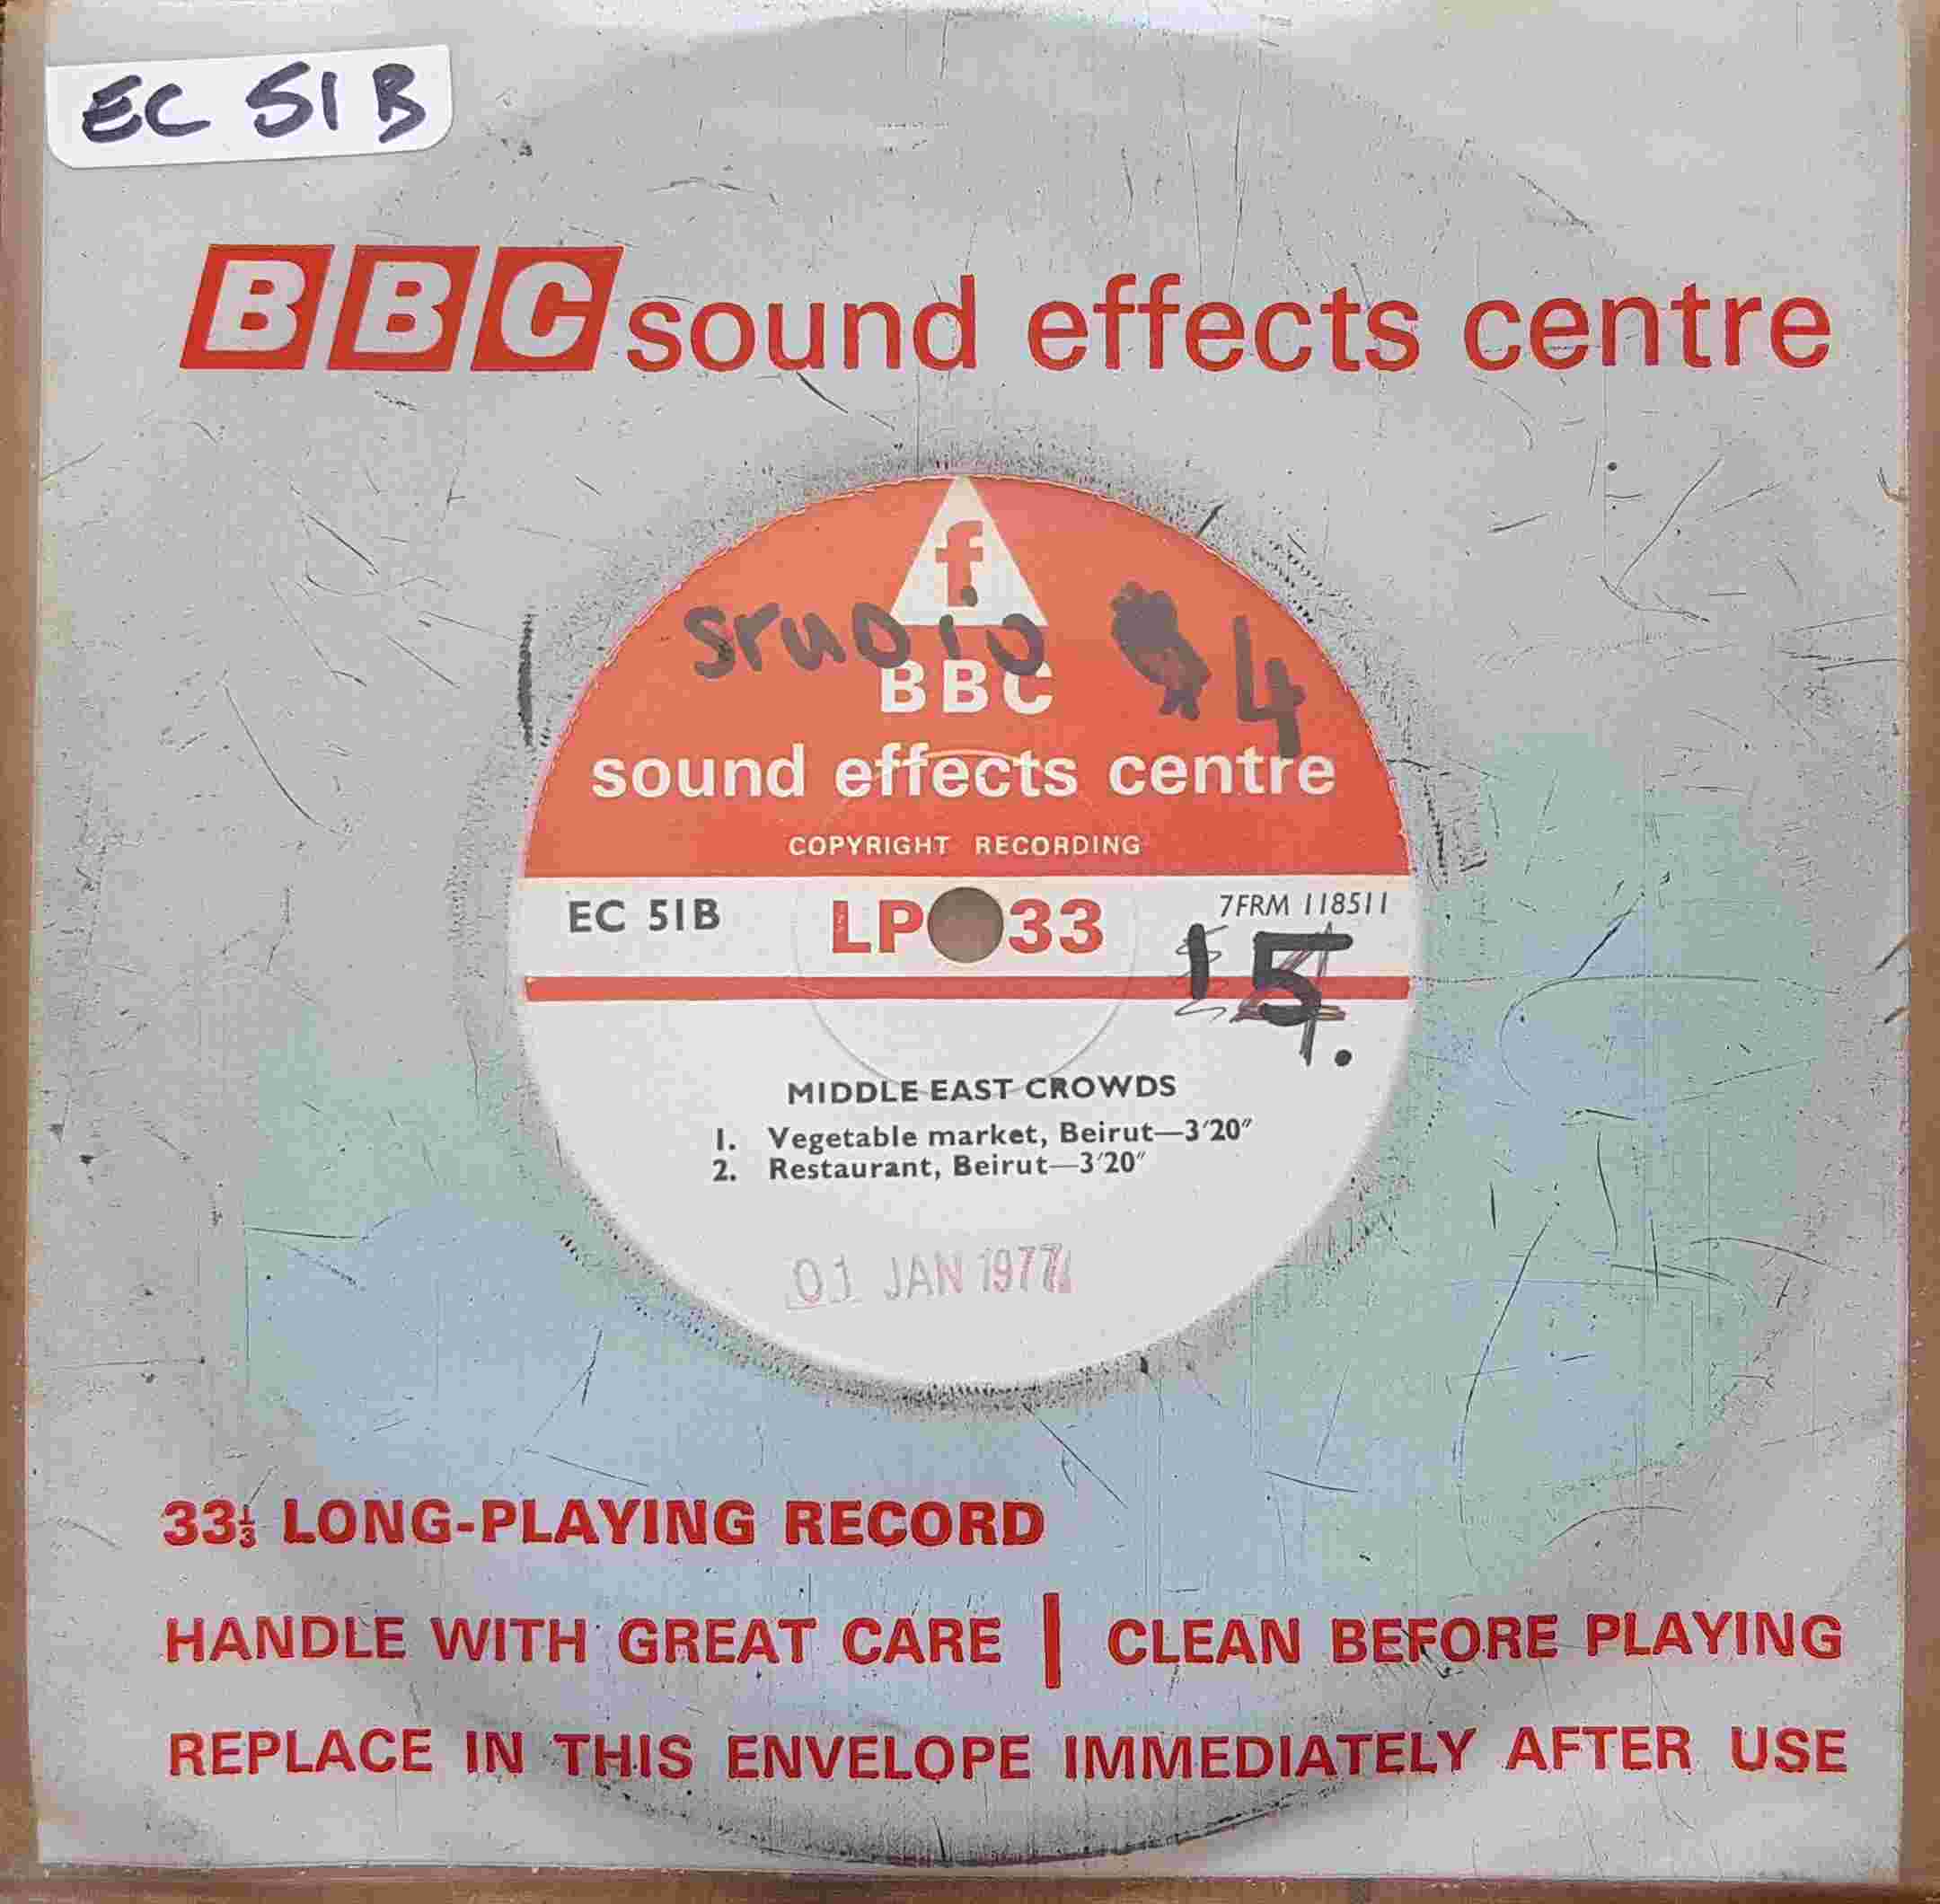 Picture of EC 51B Middle Eastern crowds by artist Not registered from the BBC records and Tapes library